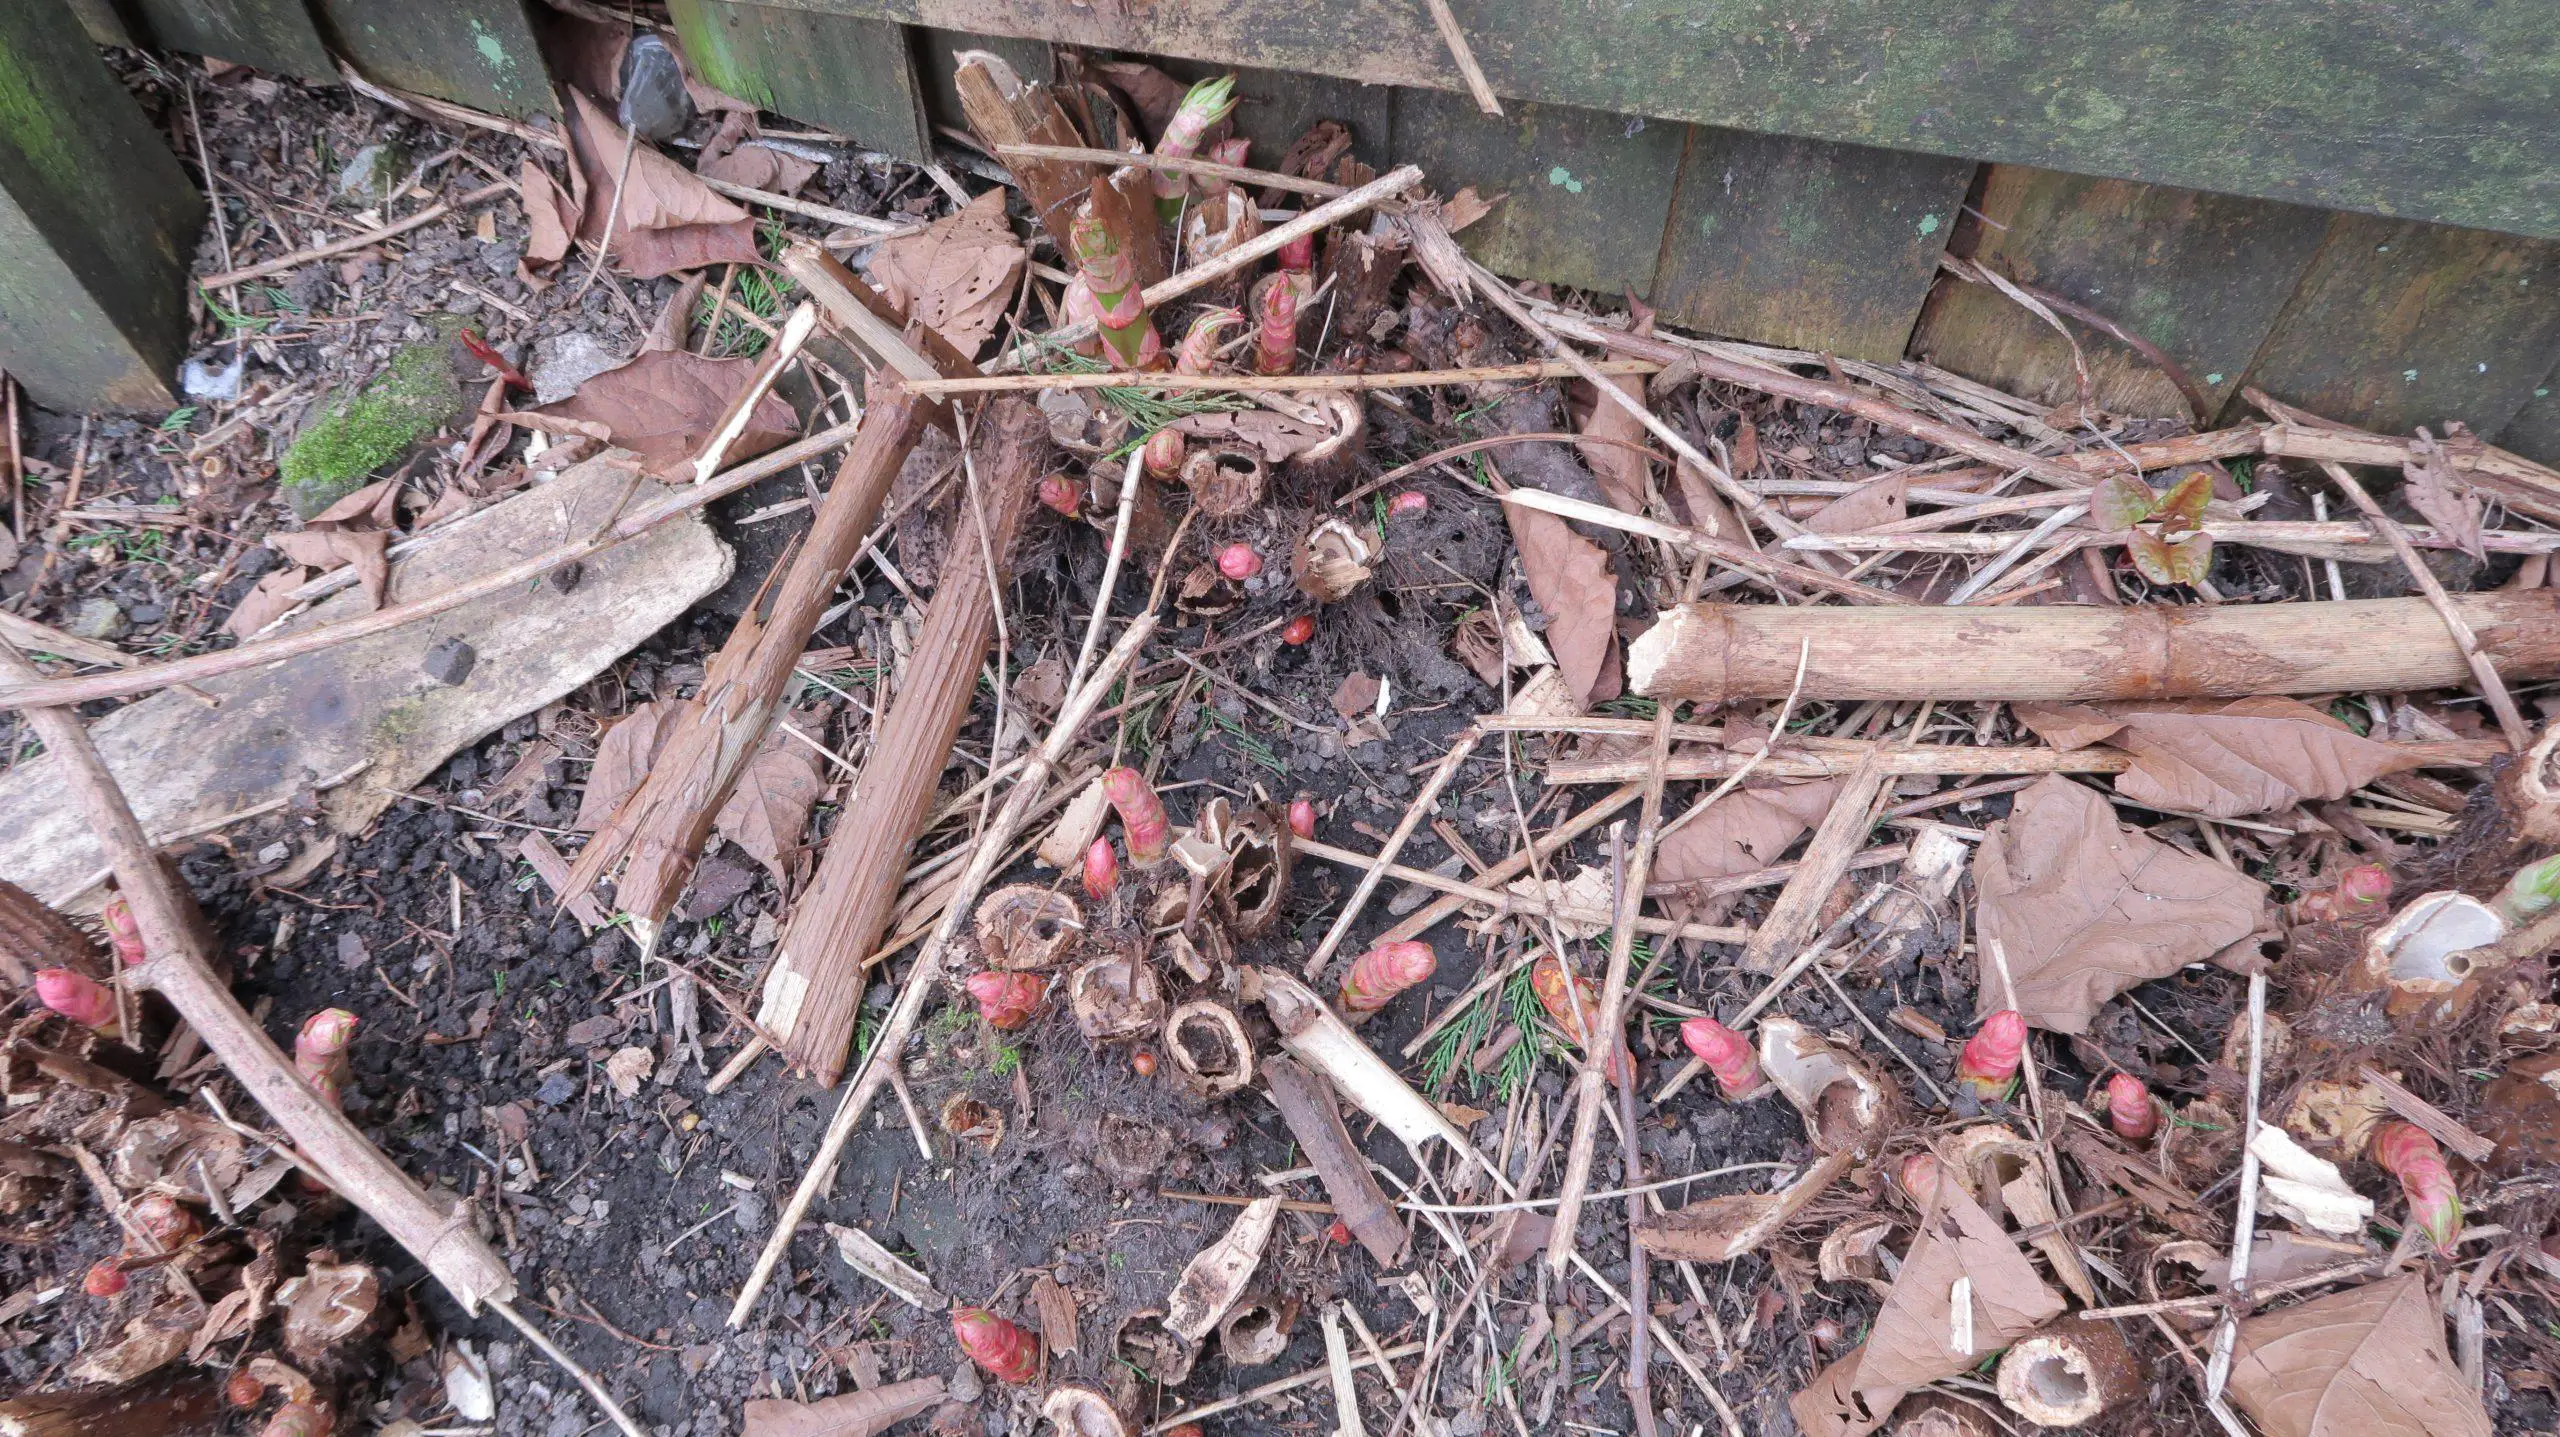 The soil loses nutrients from the creation and growth of Japanese knotweed crowns